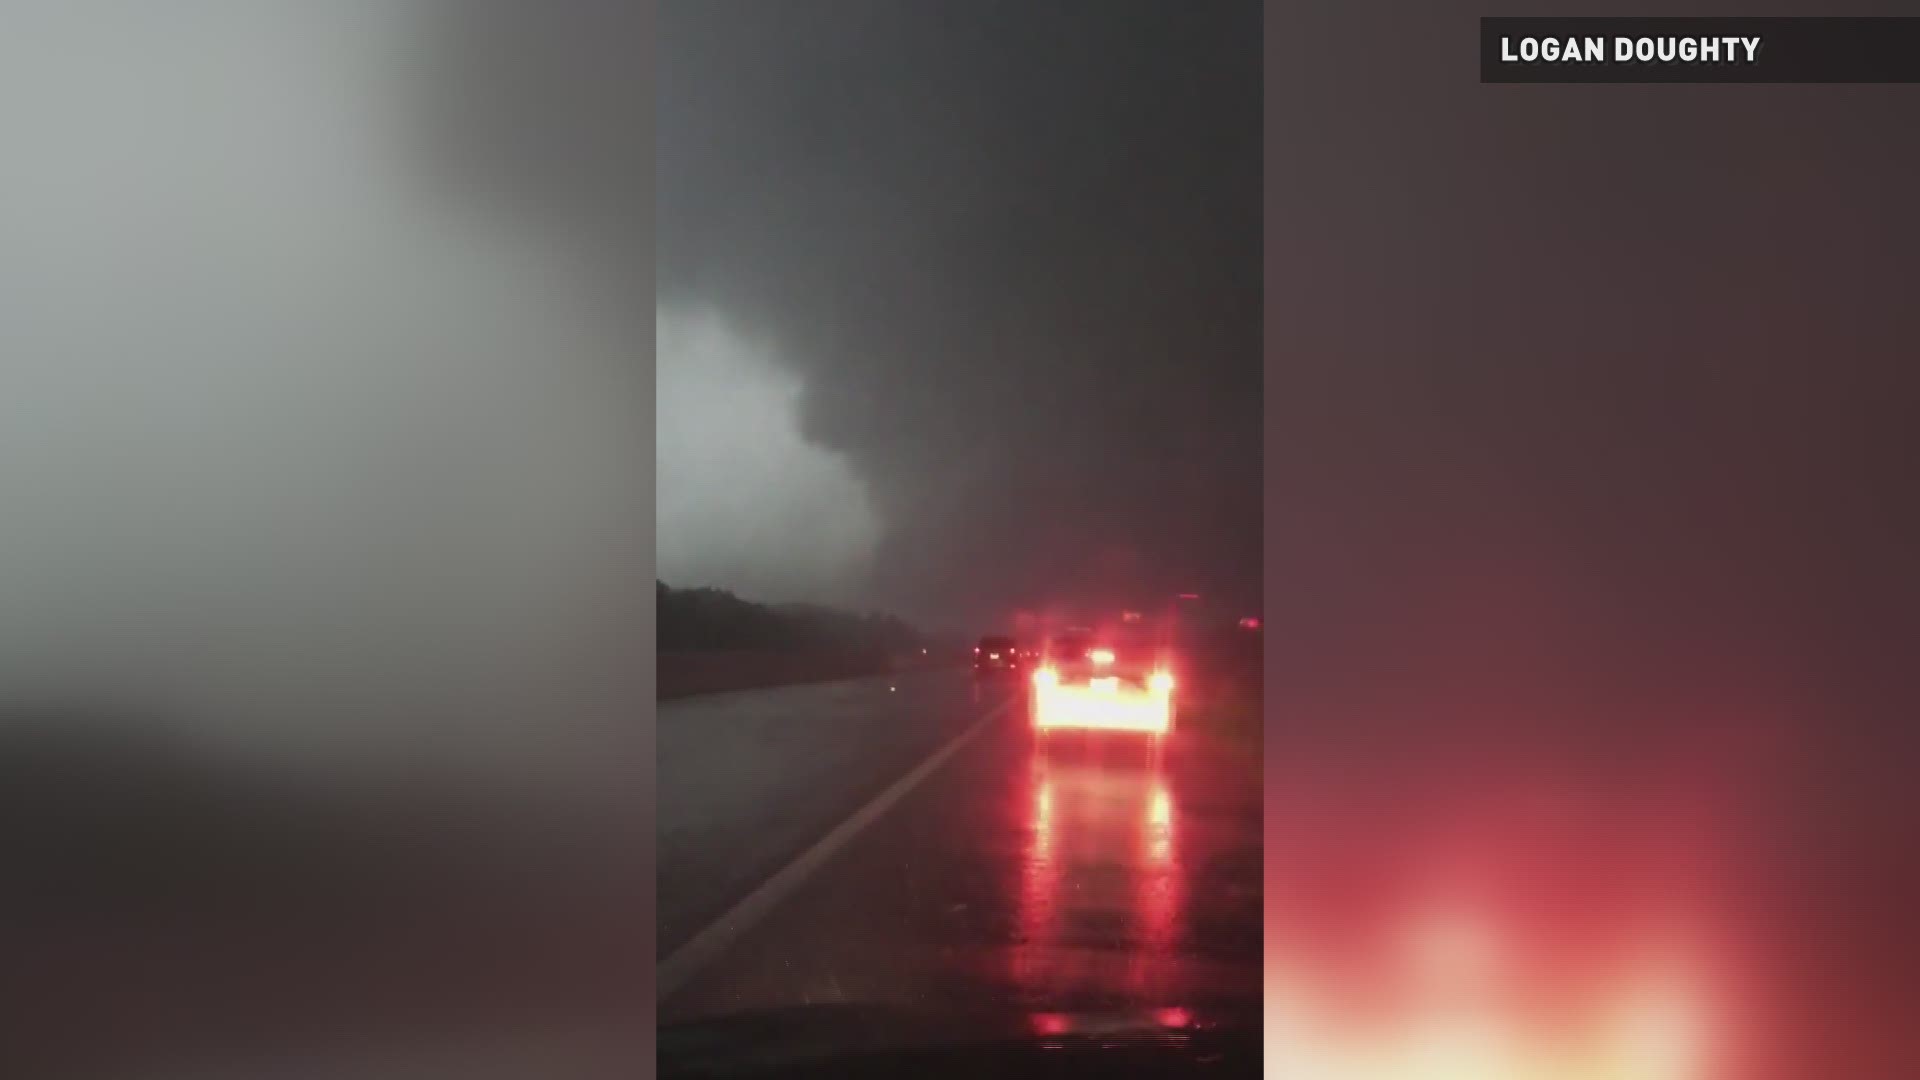 Logan Doughty captured this video of the huge tornado that devastated an area near Canton, Texas on Saturday, April 29, 2017.